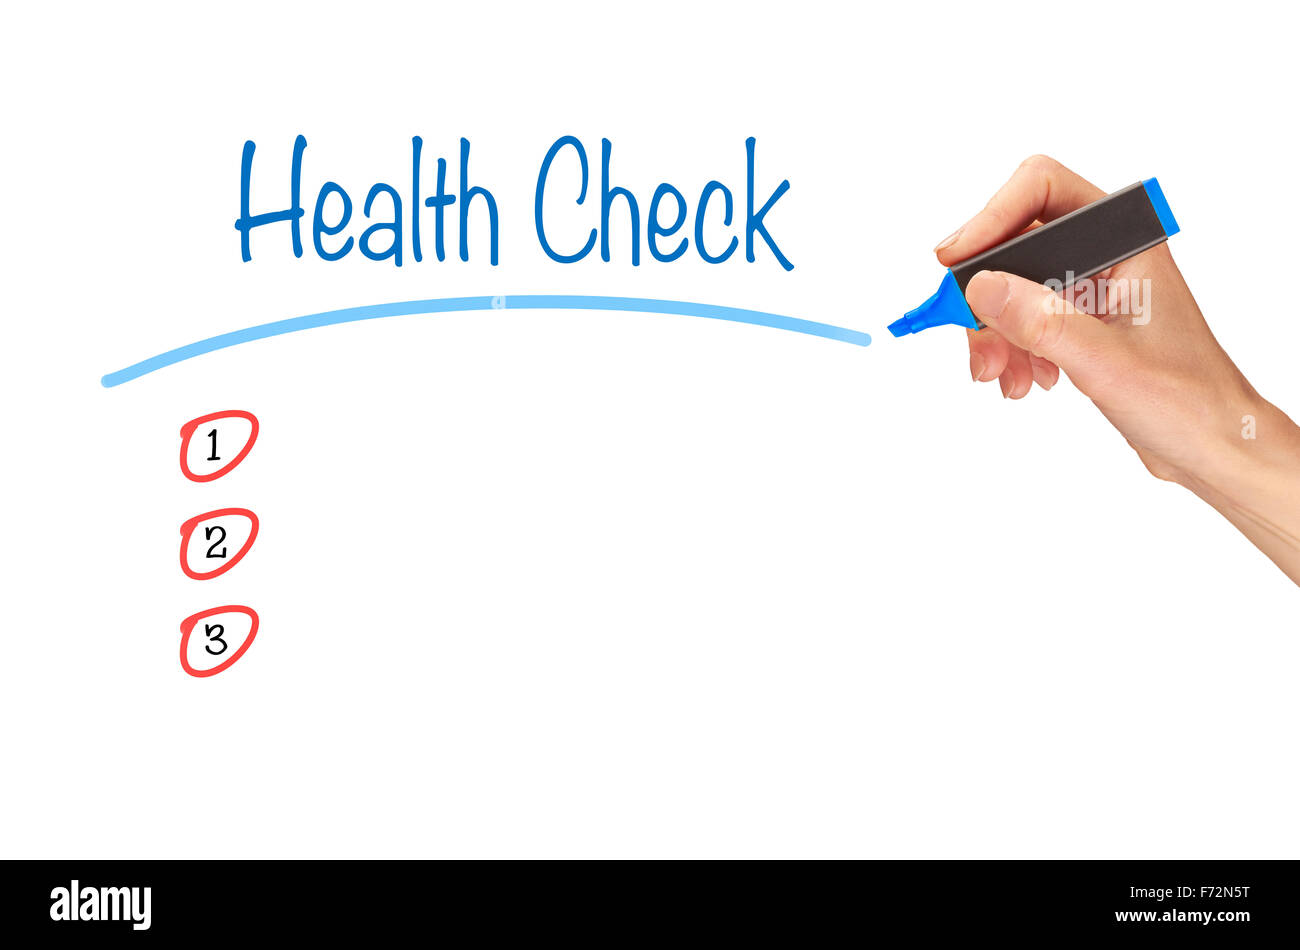 Health Check, written in marker on a clear screen. Stock Photo